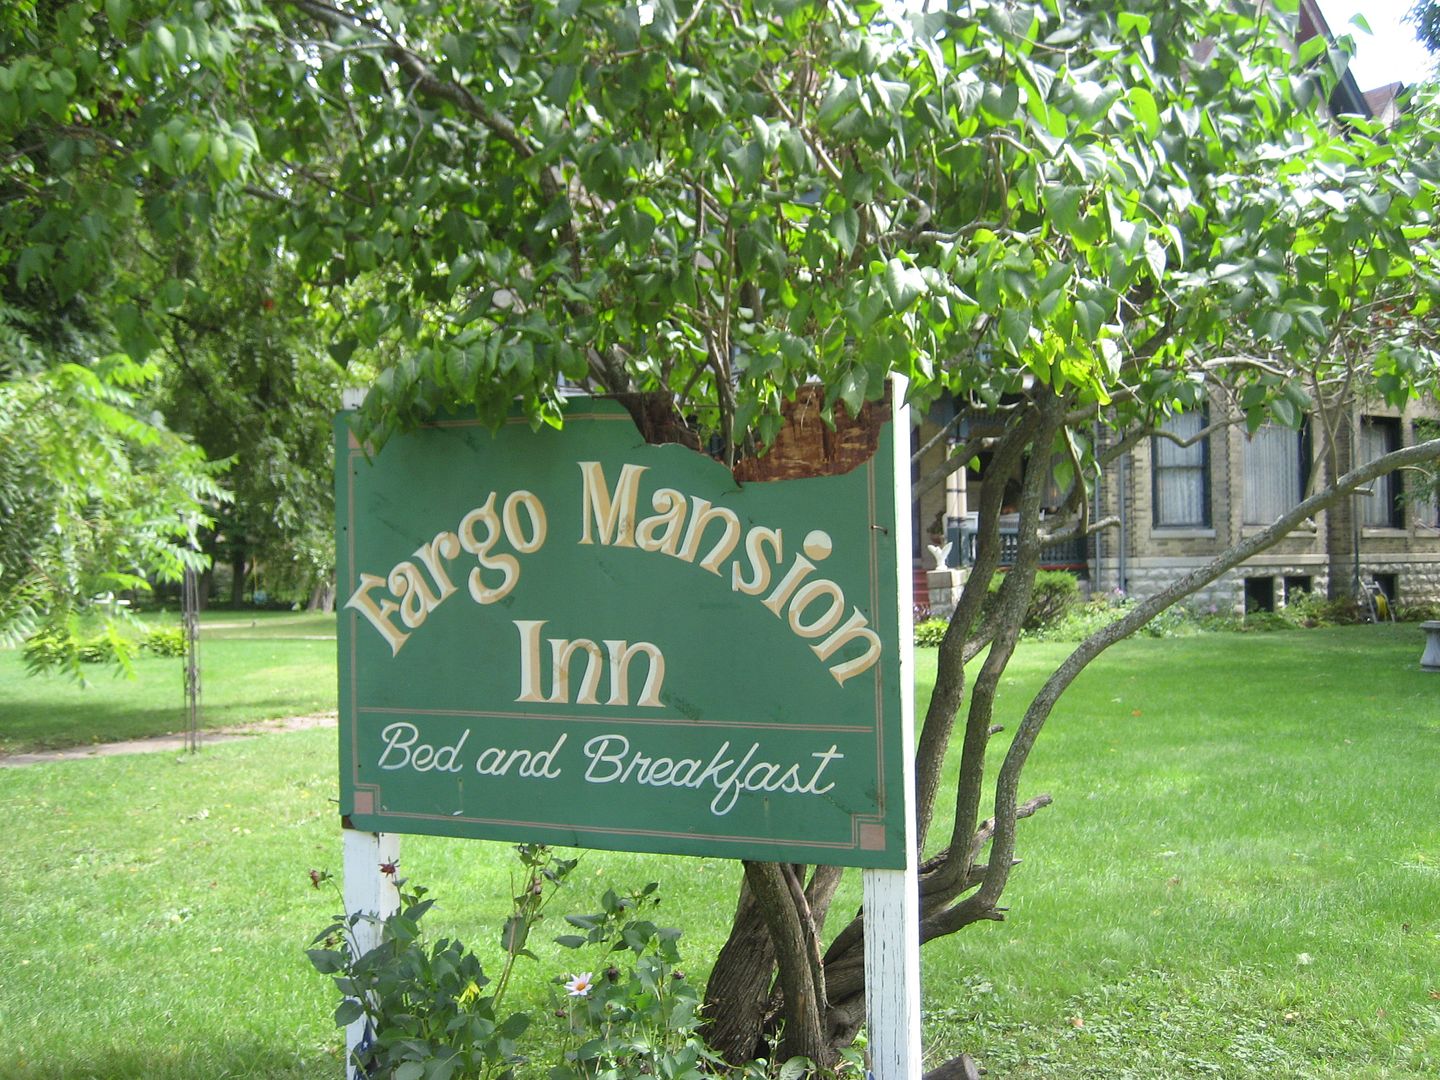 I highly recommend the Fargo Mansion Inn. 